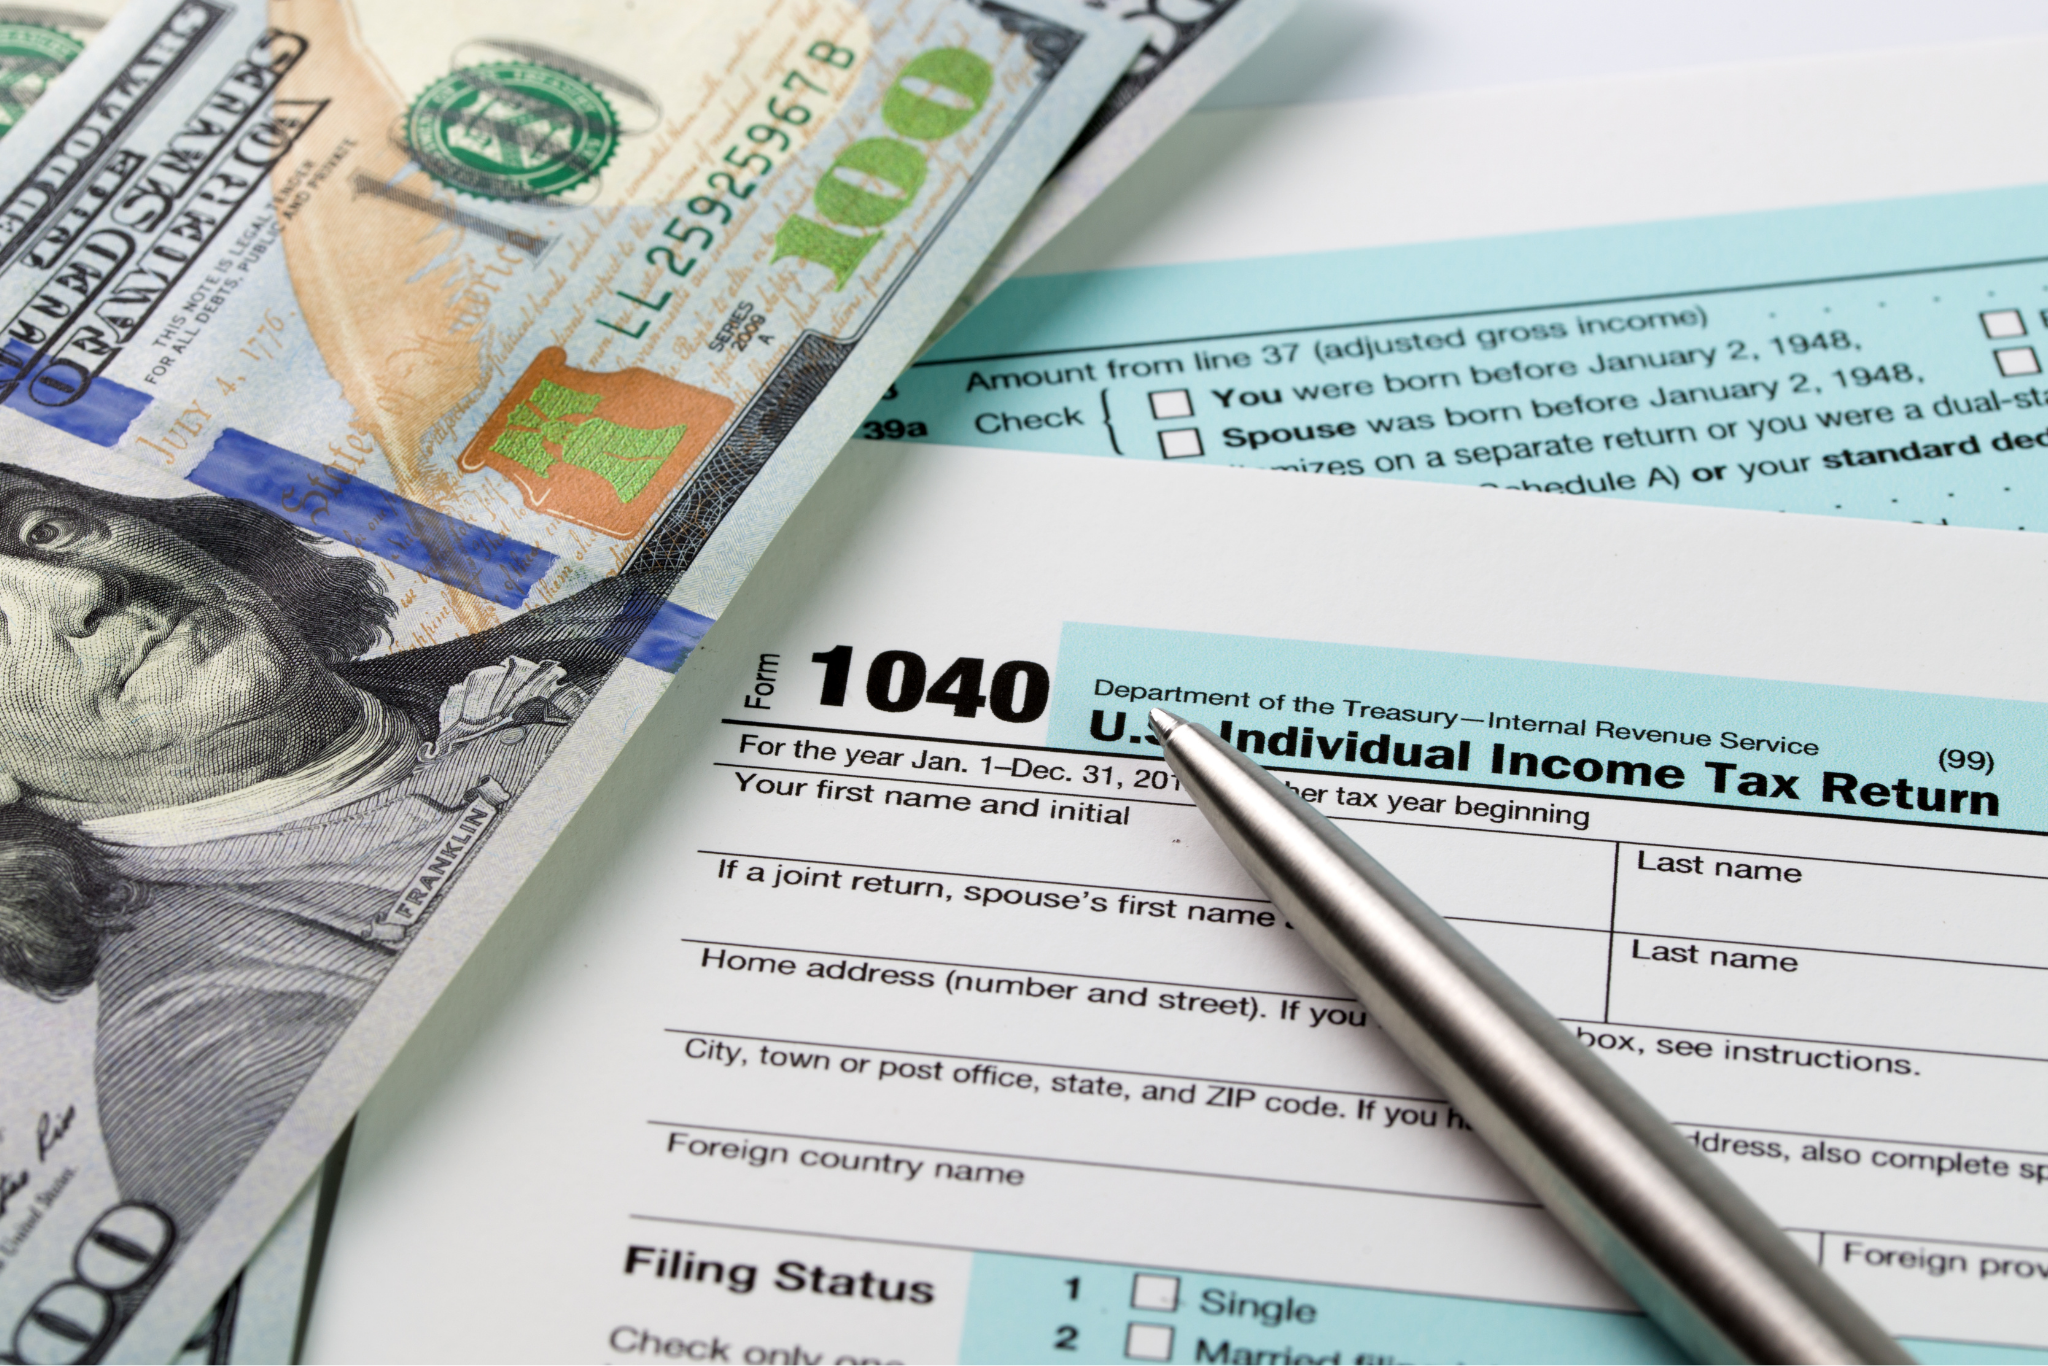 Tax Filing Season is a Little Later This Year